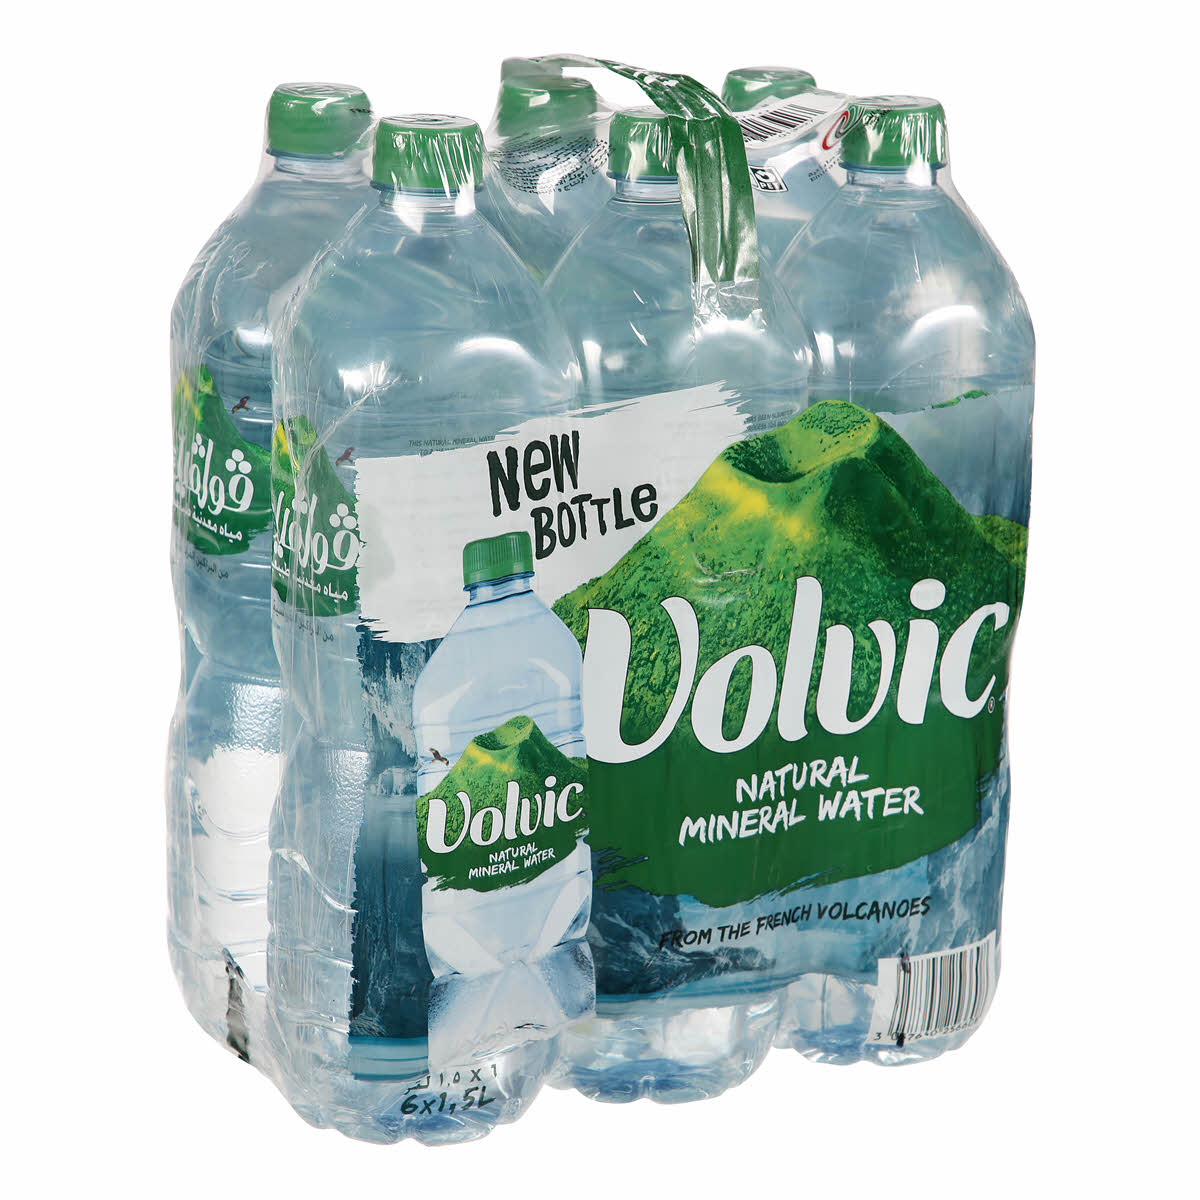 Natural Mineral Water - Volvic - 1.5 L